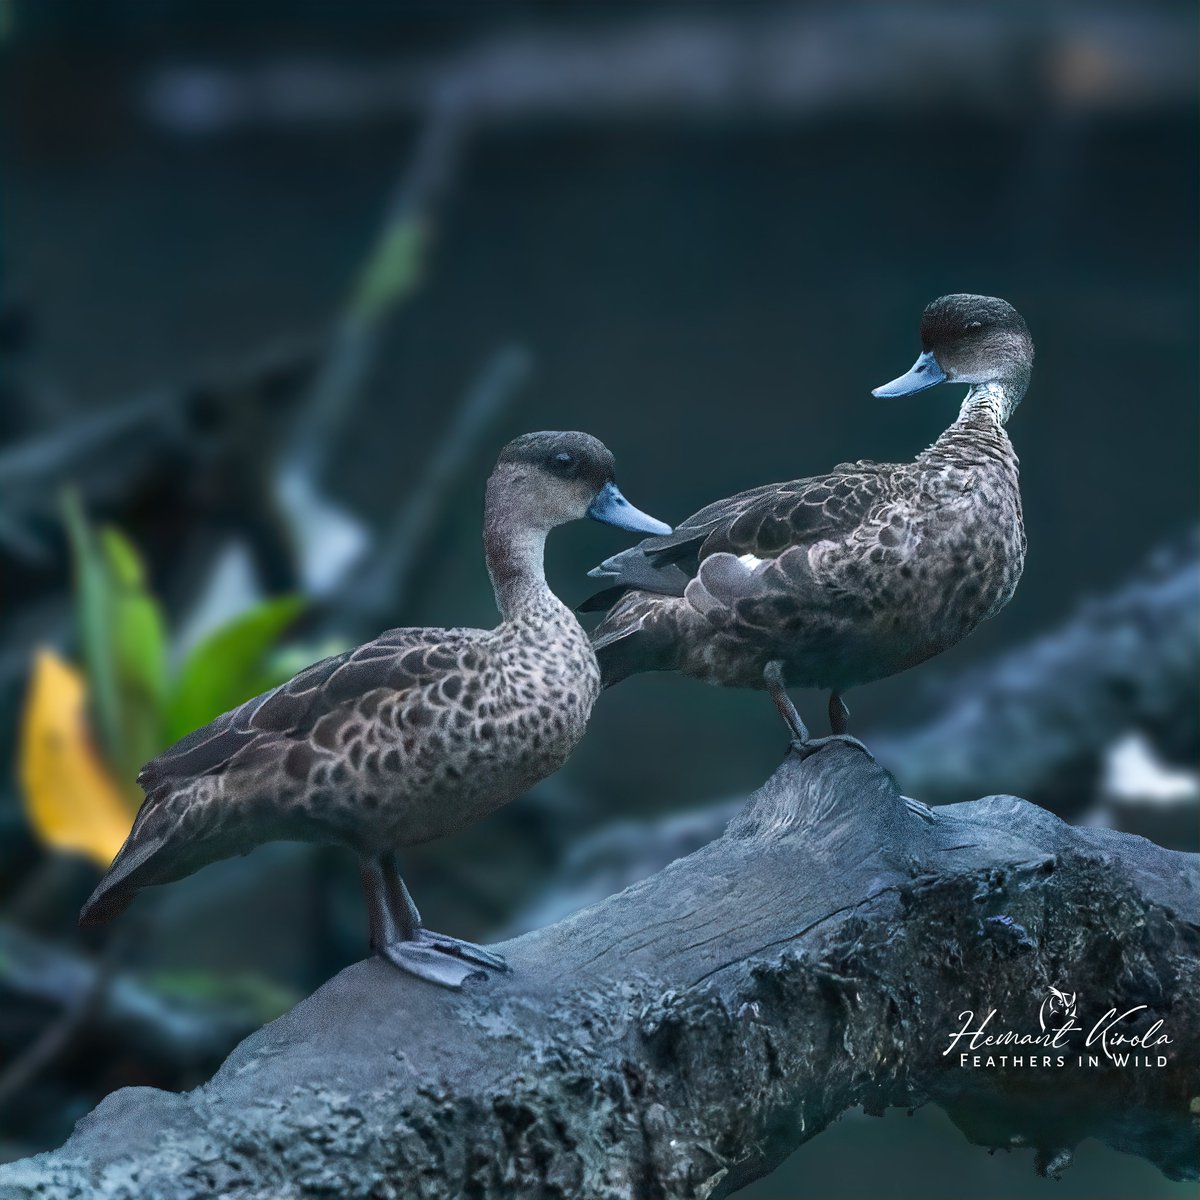 Our today's special 'The Duos'. Let's fill the X with your pic having subject in pair. A low light shot of Sunda Teal - Anas gibberifrons #IndiAves #ThePhotoHour #TheDuos